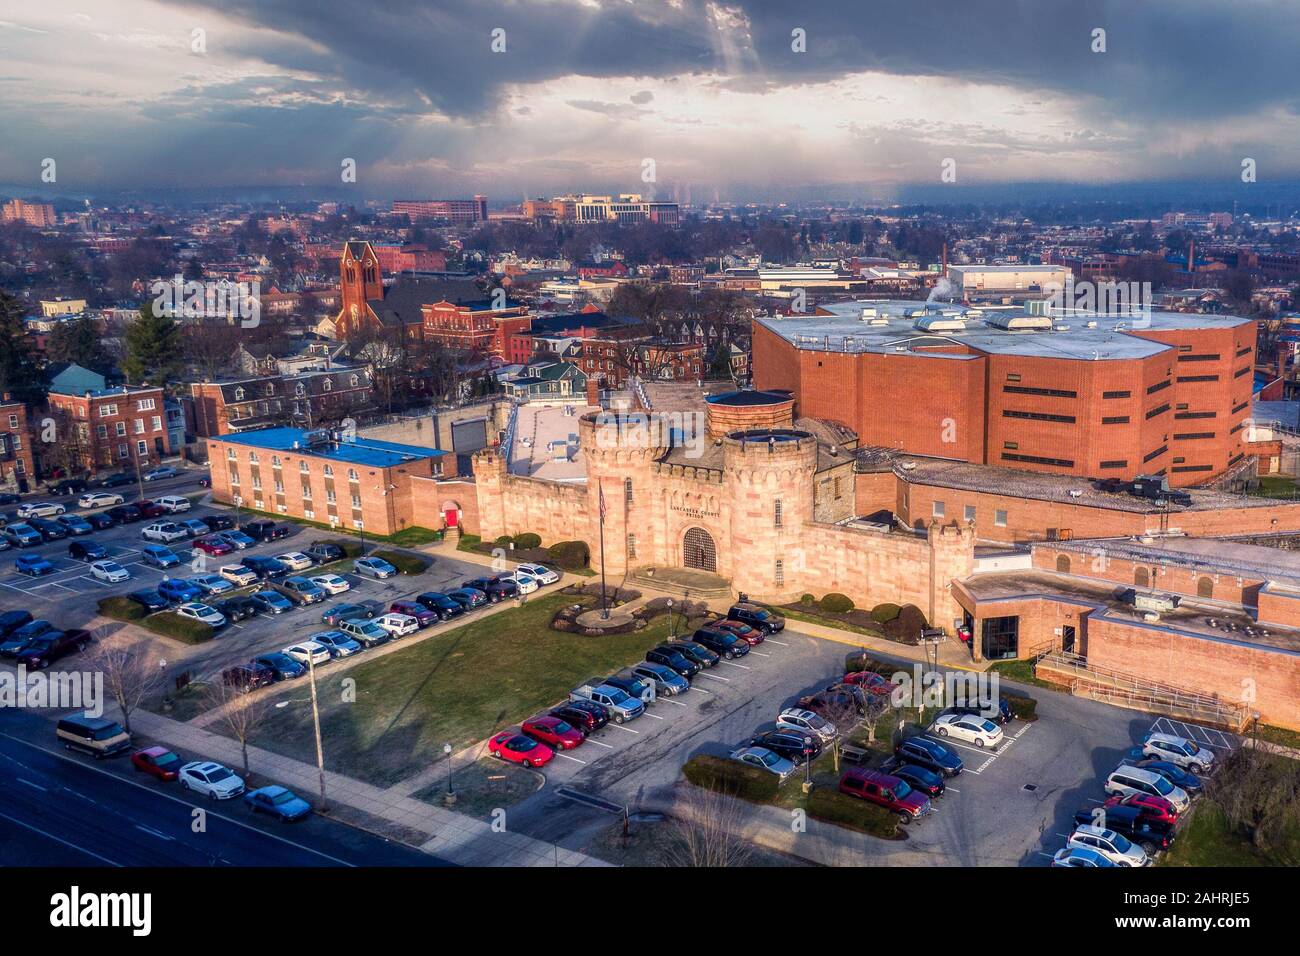 Correction facility aerial revealing shot, Lancaster County Jail in Pennsylvania, aerial view Stock Photo